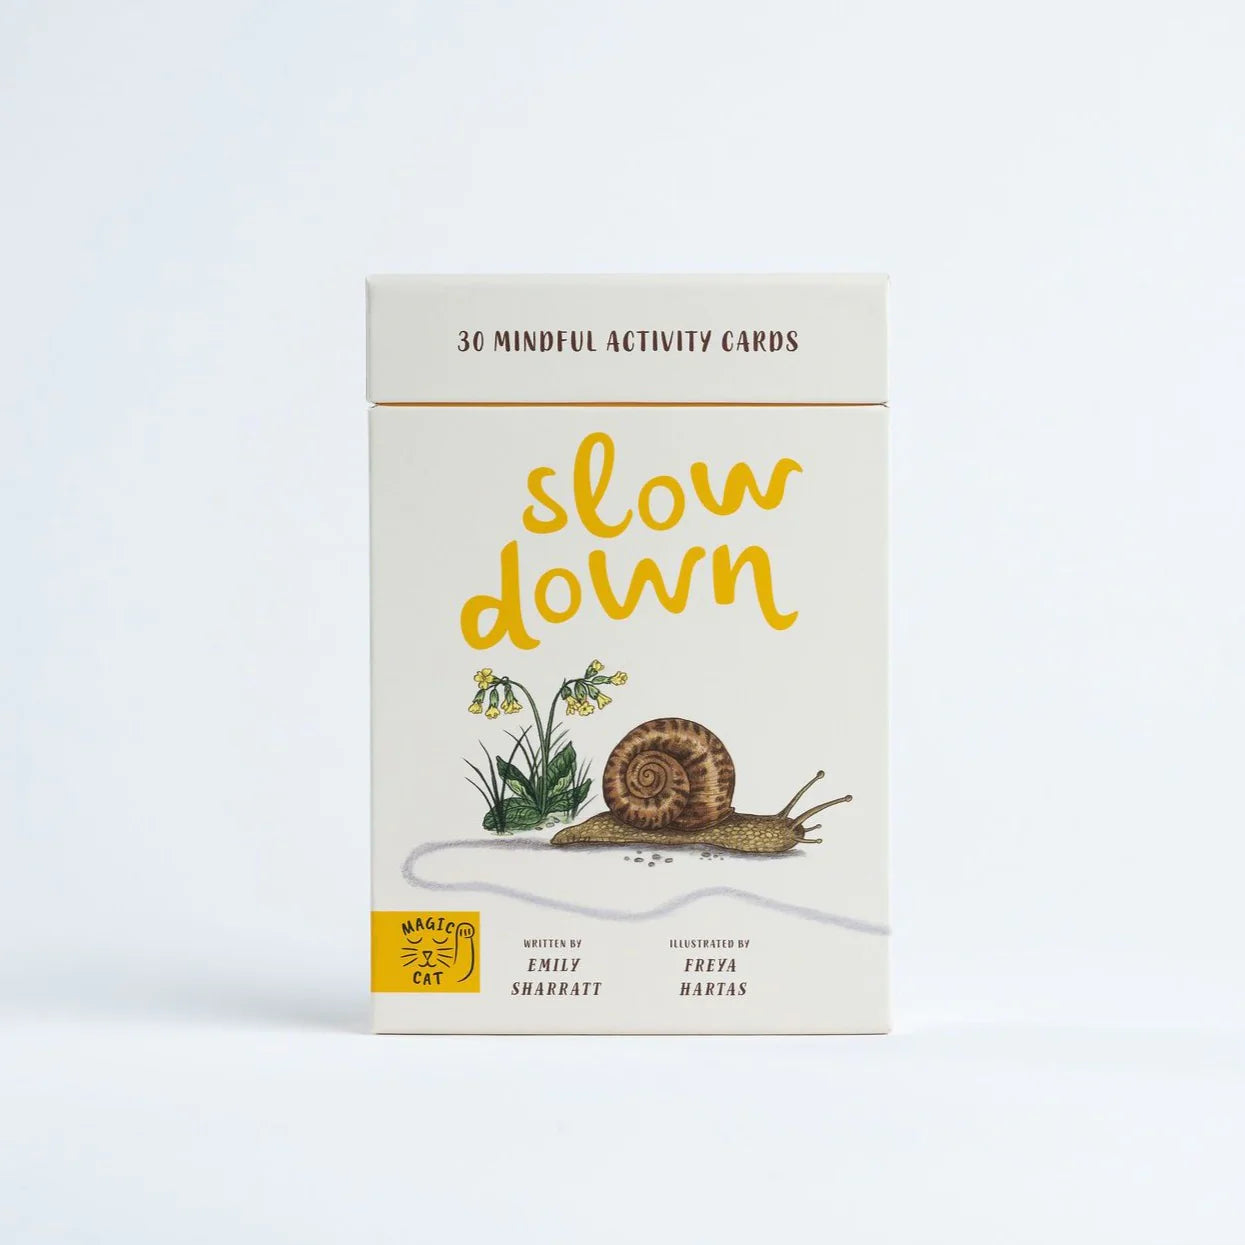 Slow Down 30 Mindful Activity Cards